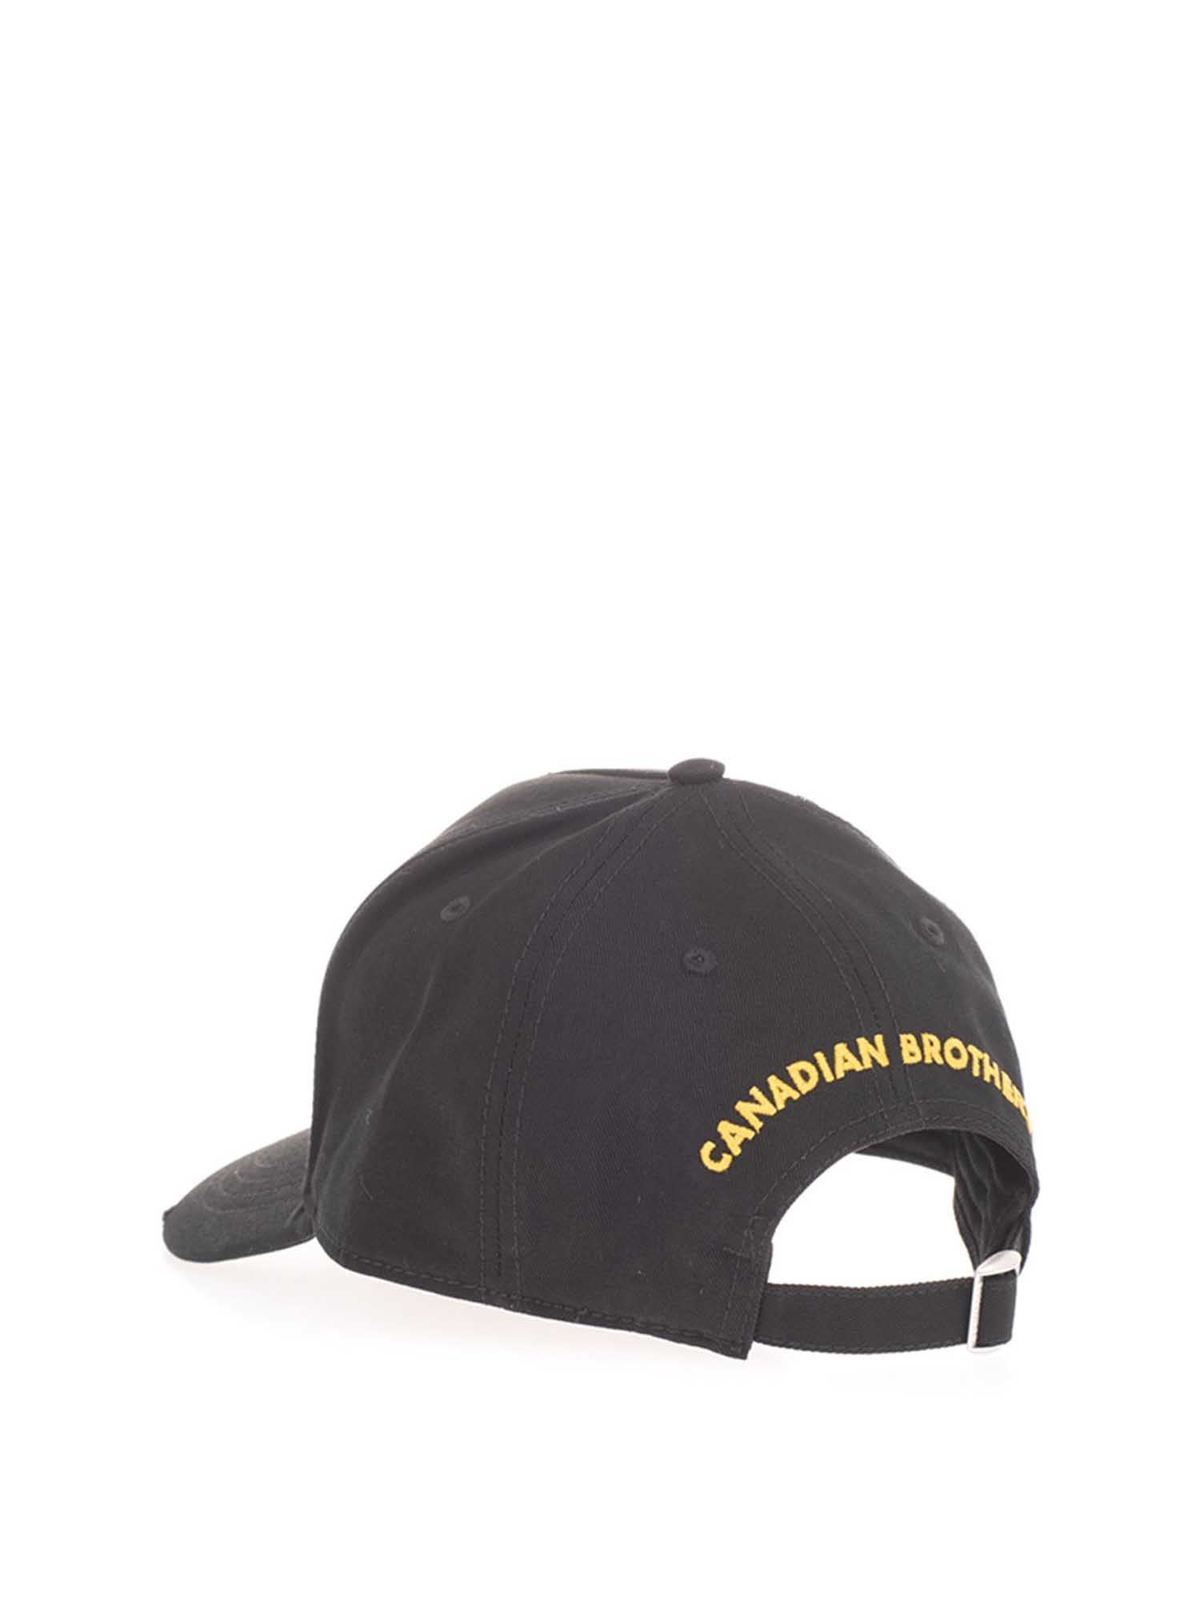 canadian brothers cap